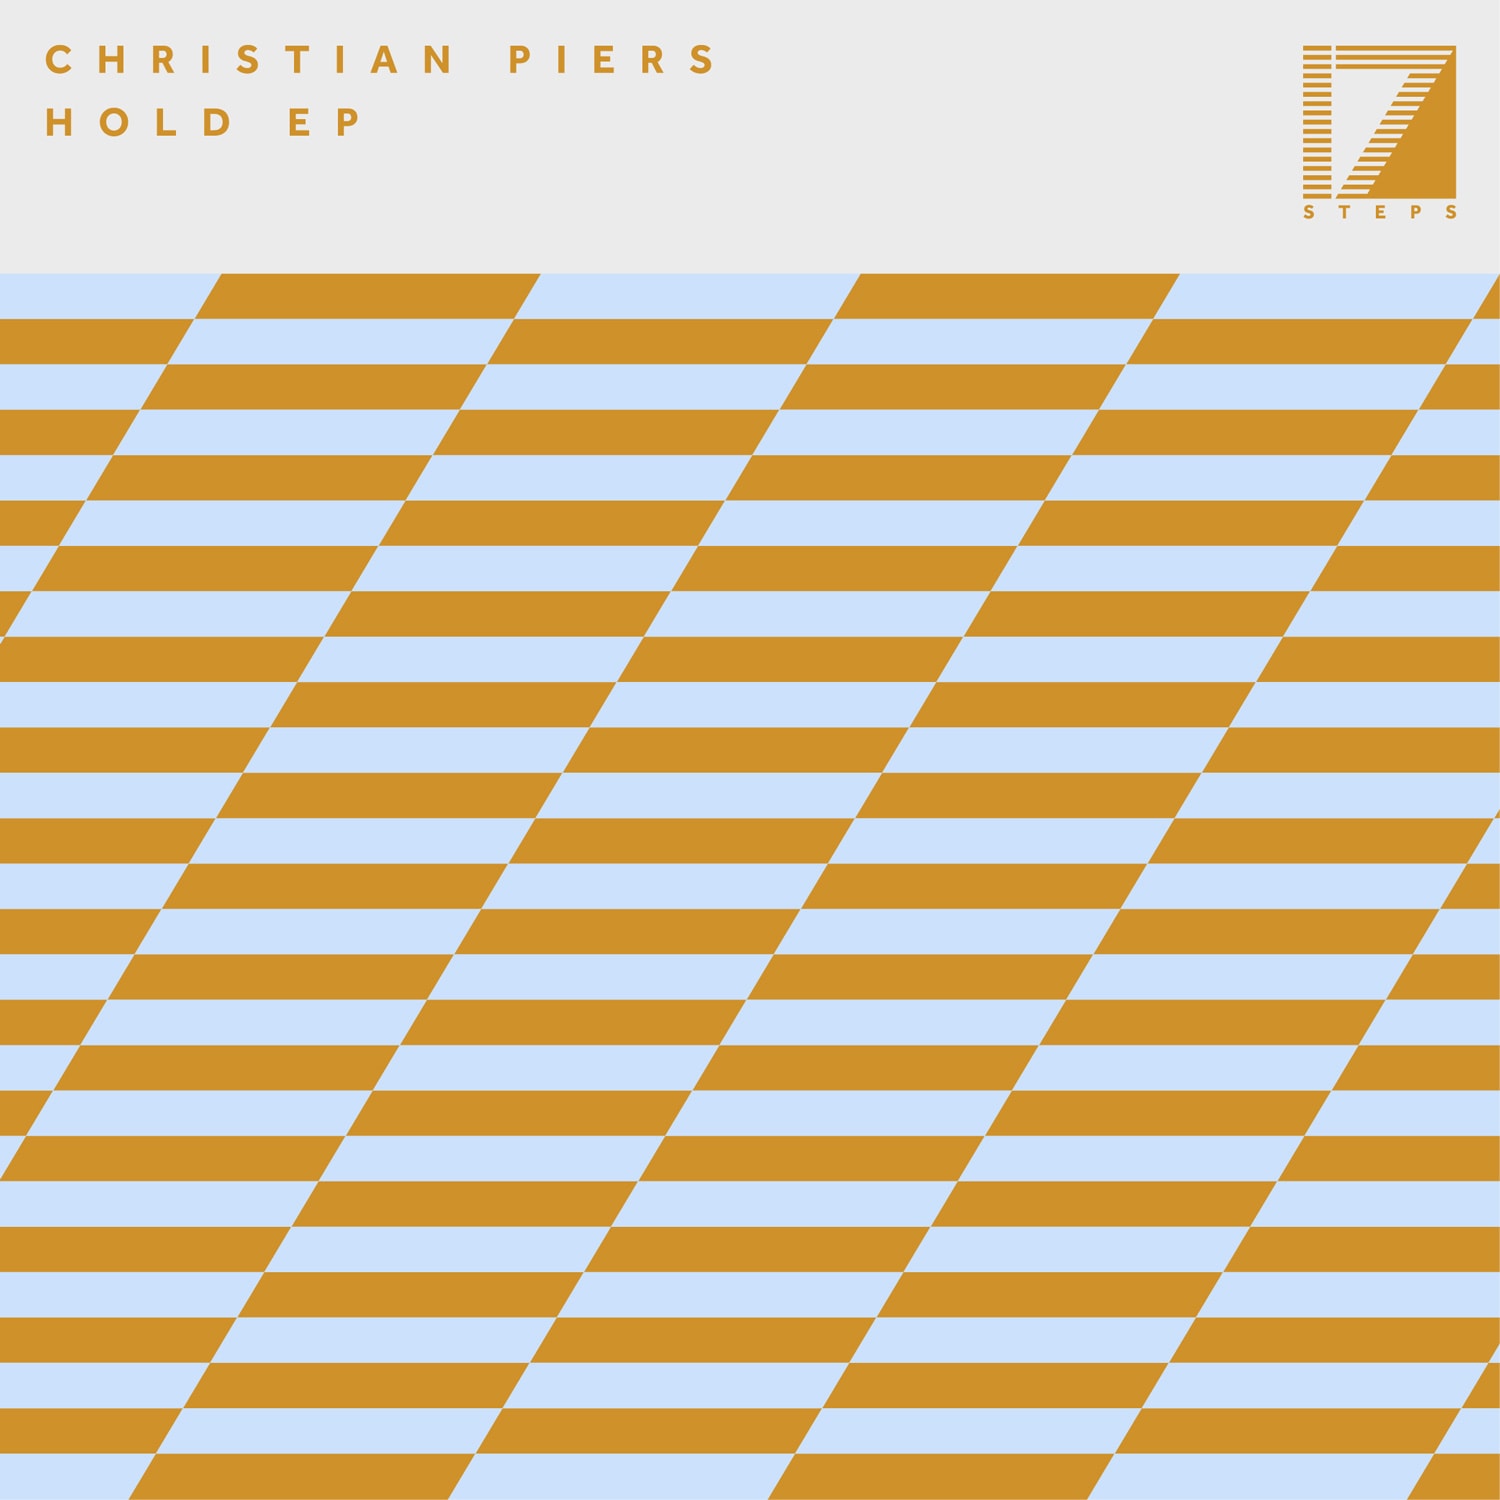 CHRISTIAN PIERS – HOLD EP